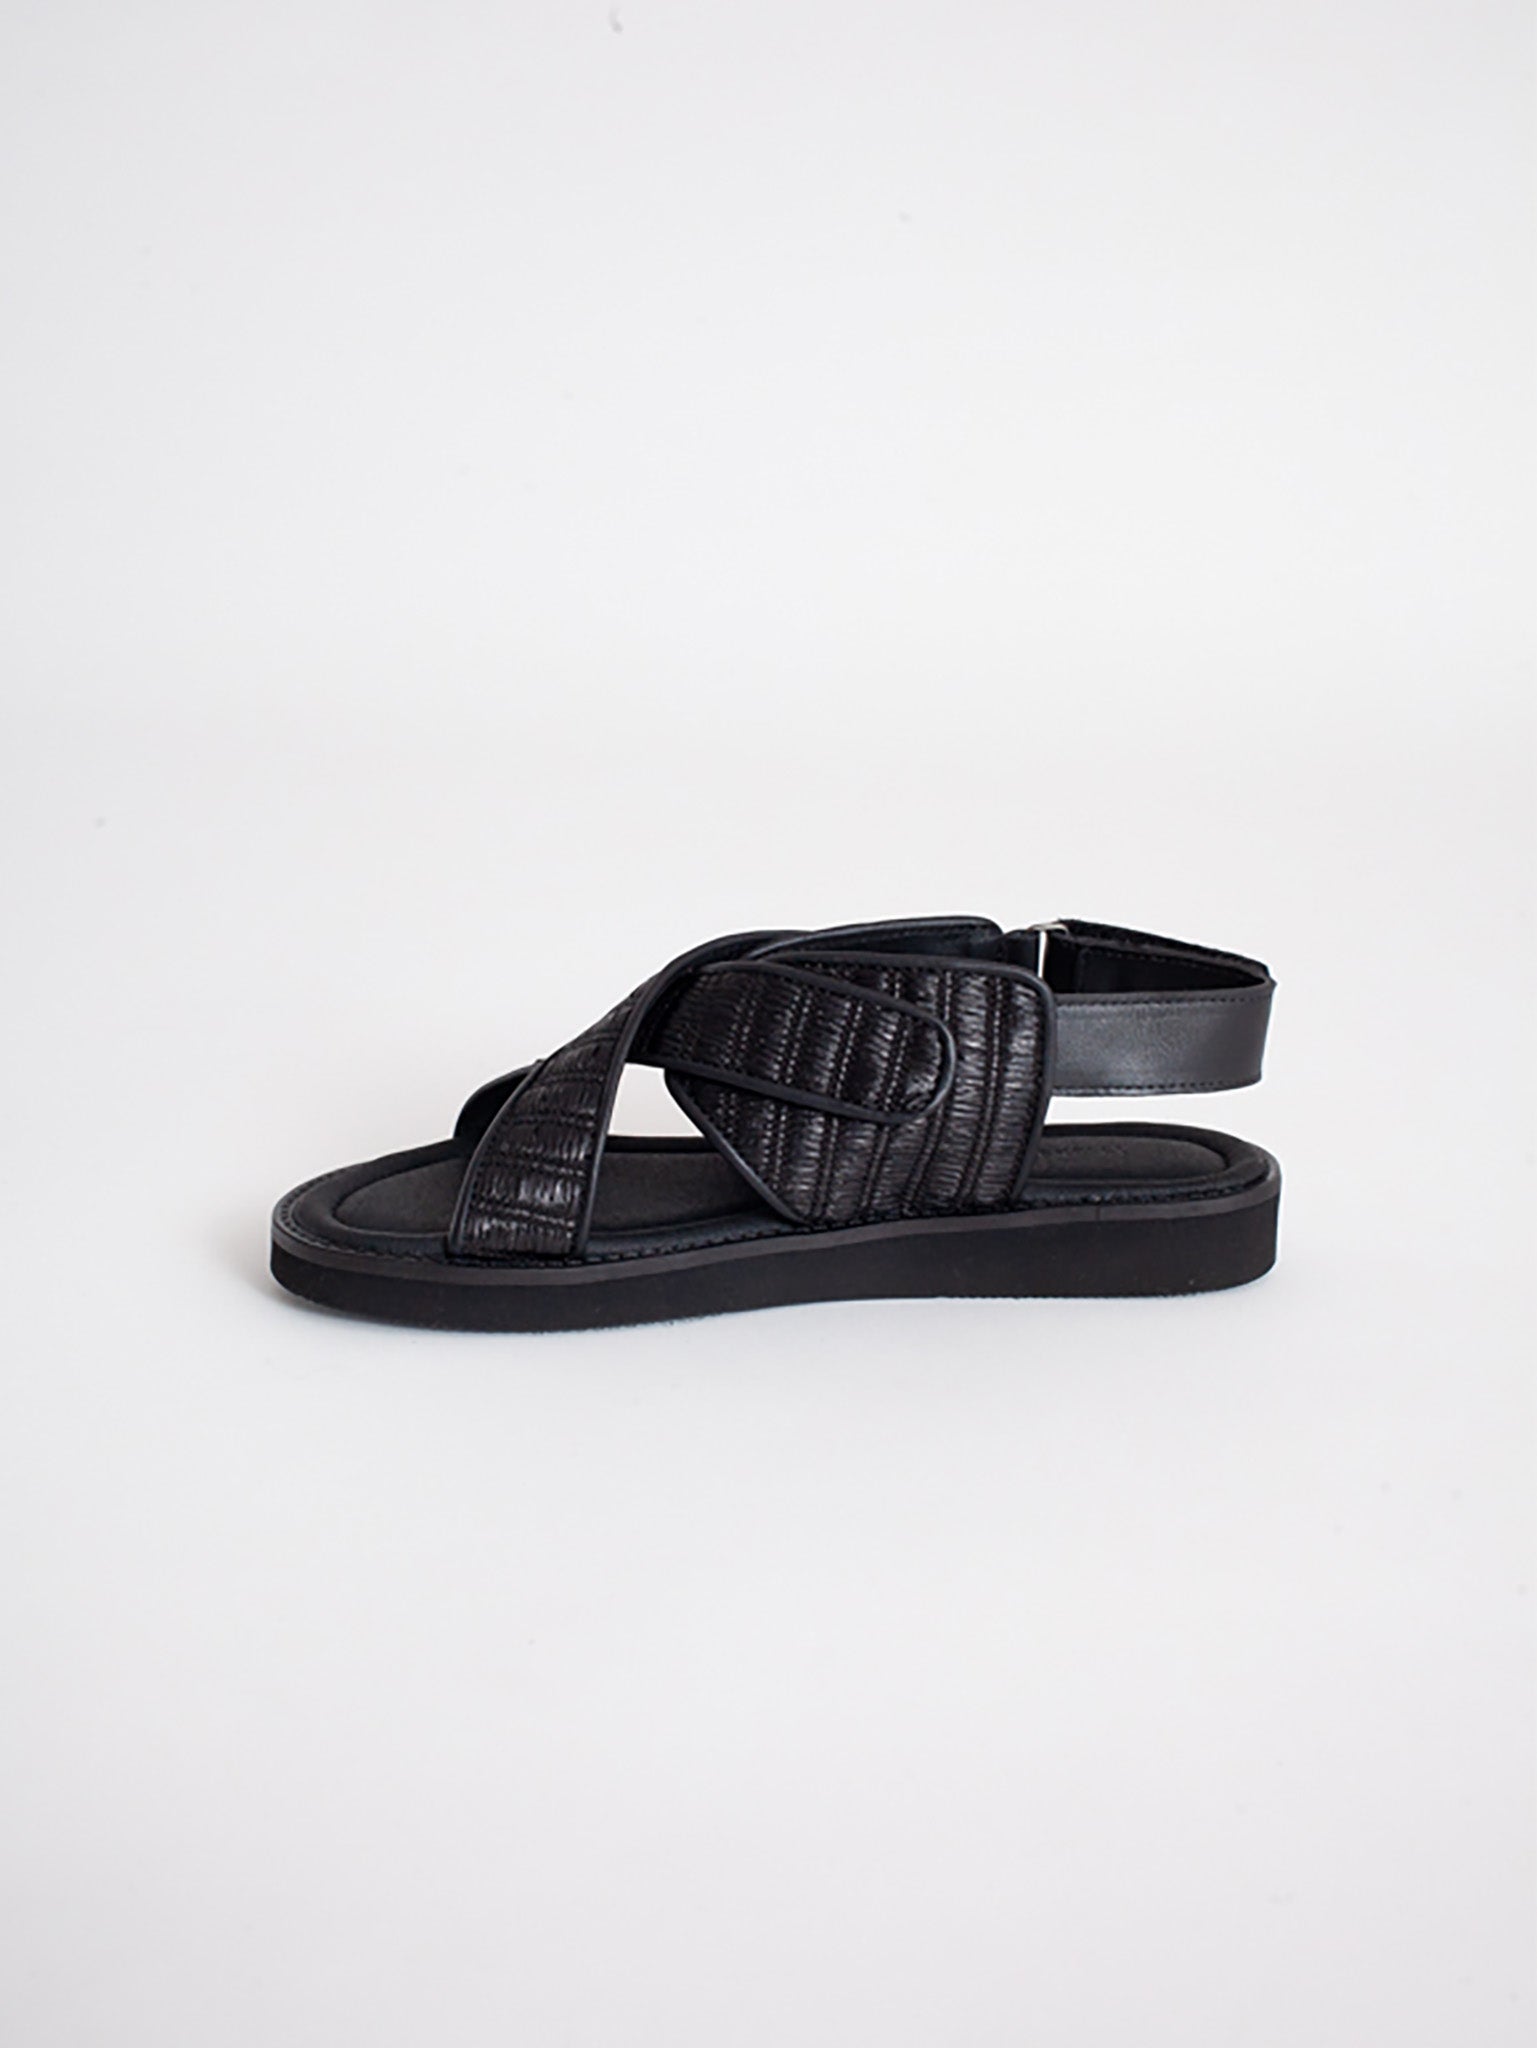 There Sandals, black